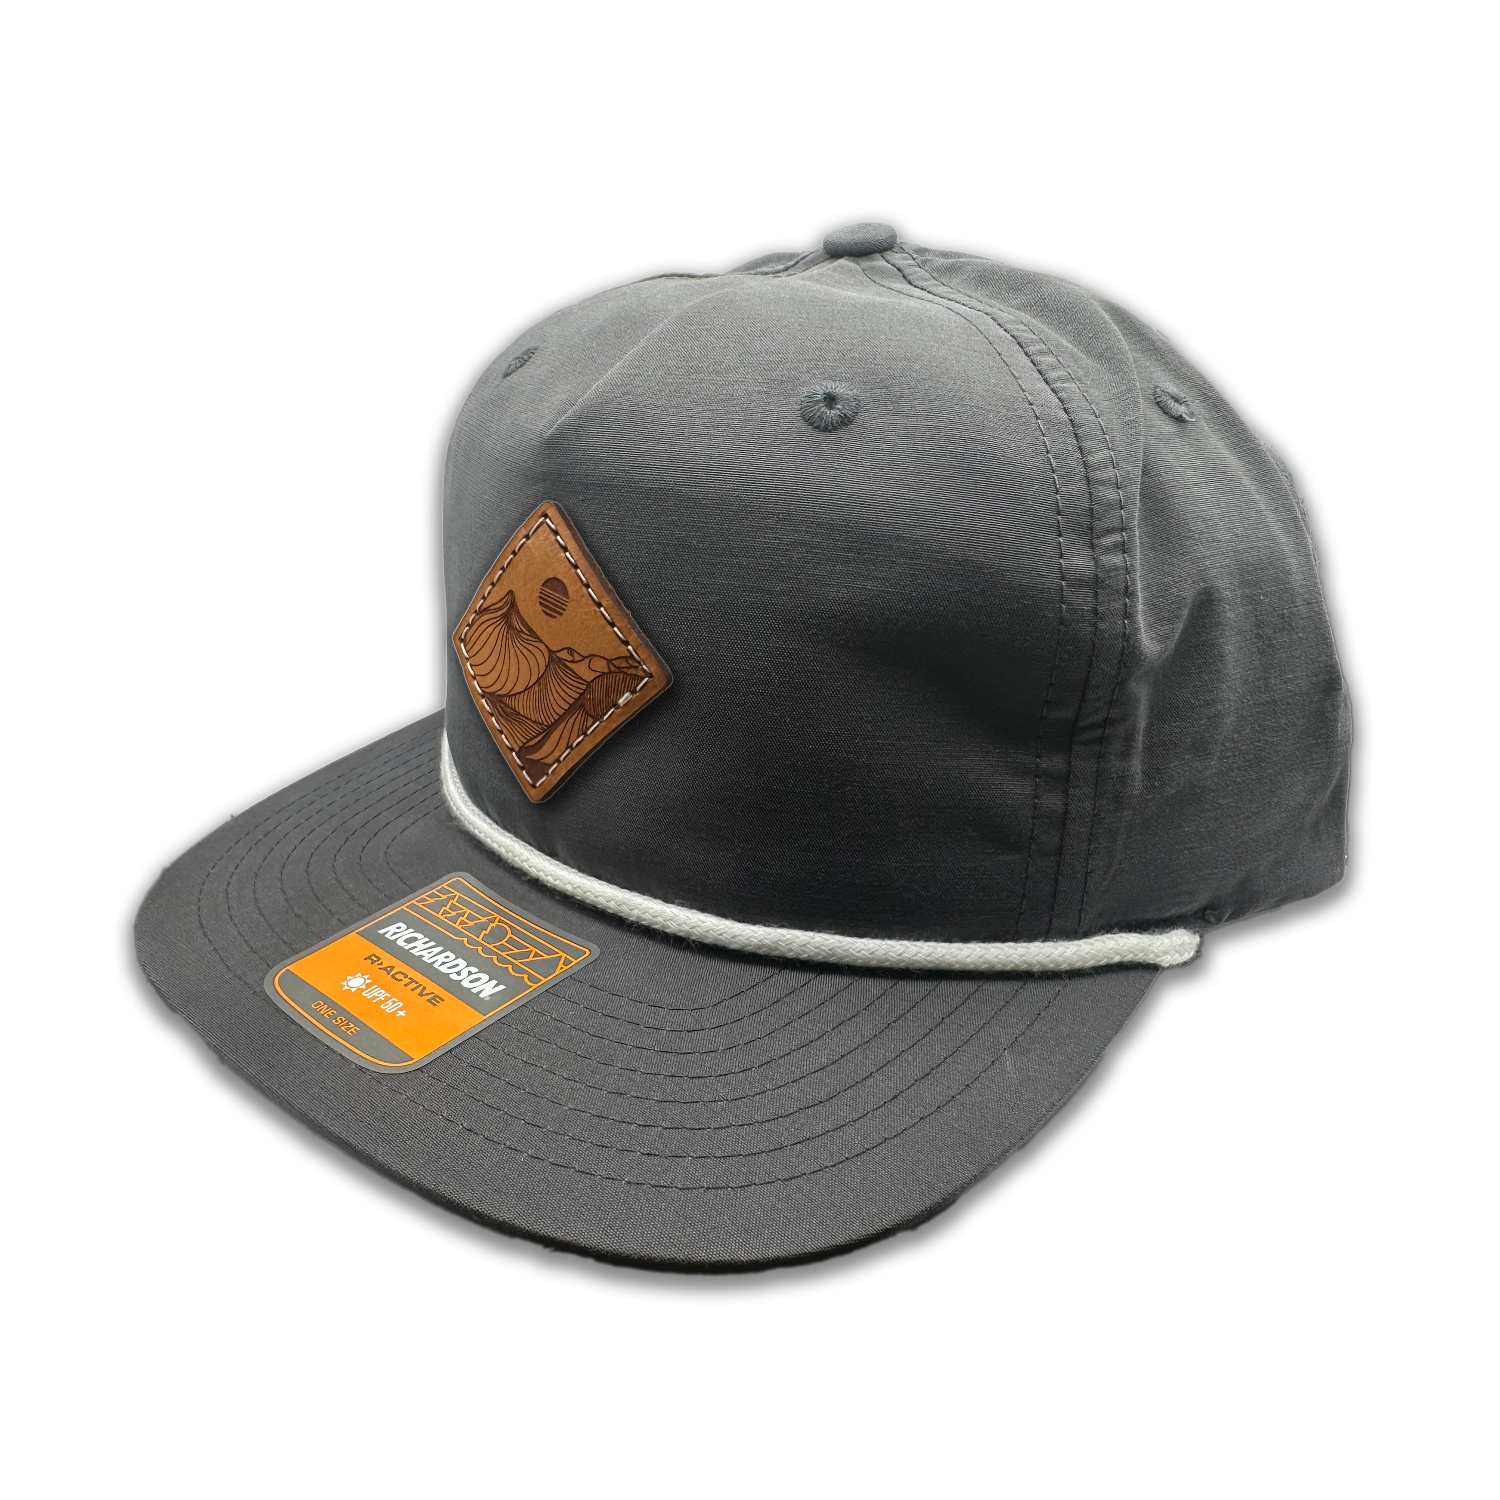 Get a taste of rugged charm with the Charcoal Richardson 256 Rope Umpqua Hat. Made in Colorado, USA, this low profile SnapBack cap features a stylish Desert Mountain patch design. The genuine leather patch, laser engraved and sewn on, adds a touch of sophistication to this flatbill hat crafted from lightweight material.